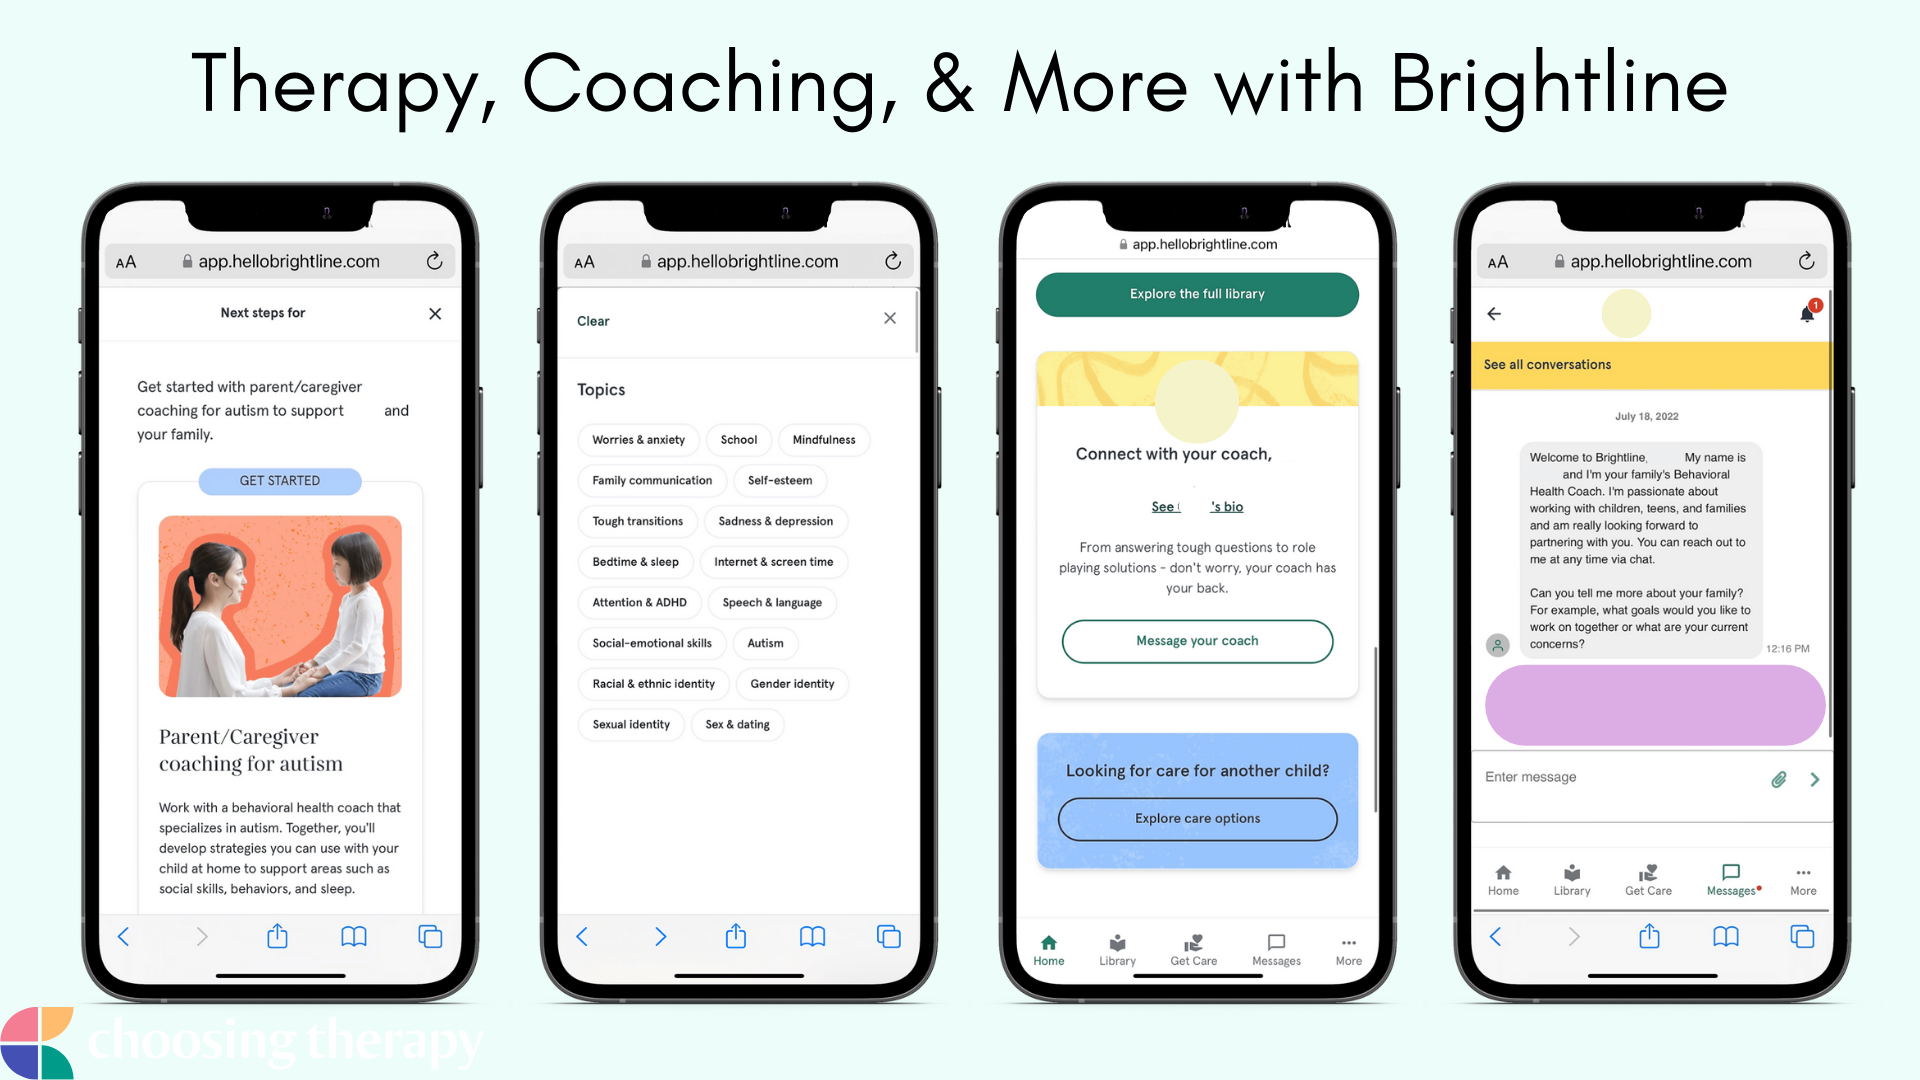 Image of Therapy, Coaching, and more with Brightline